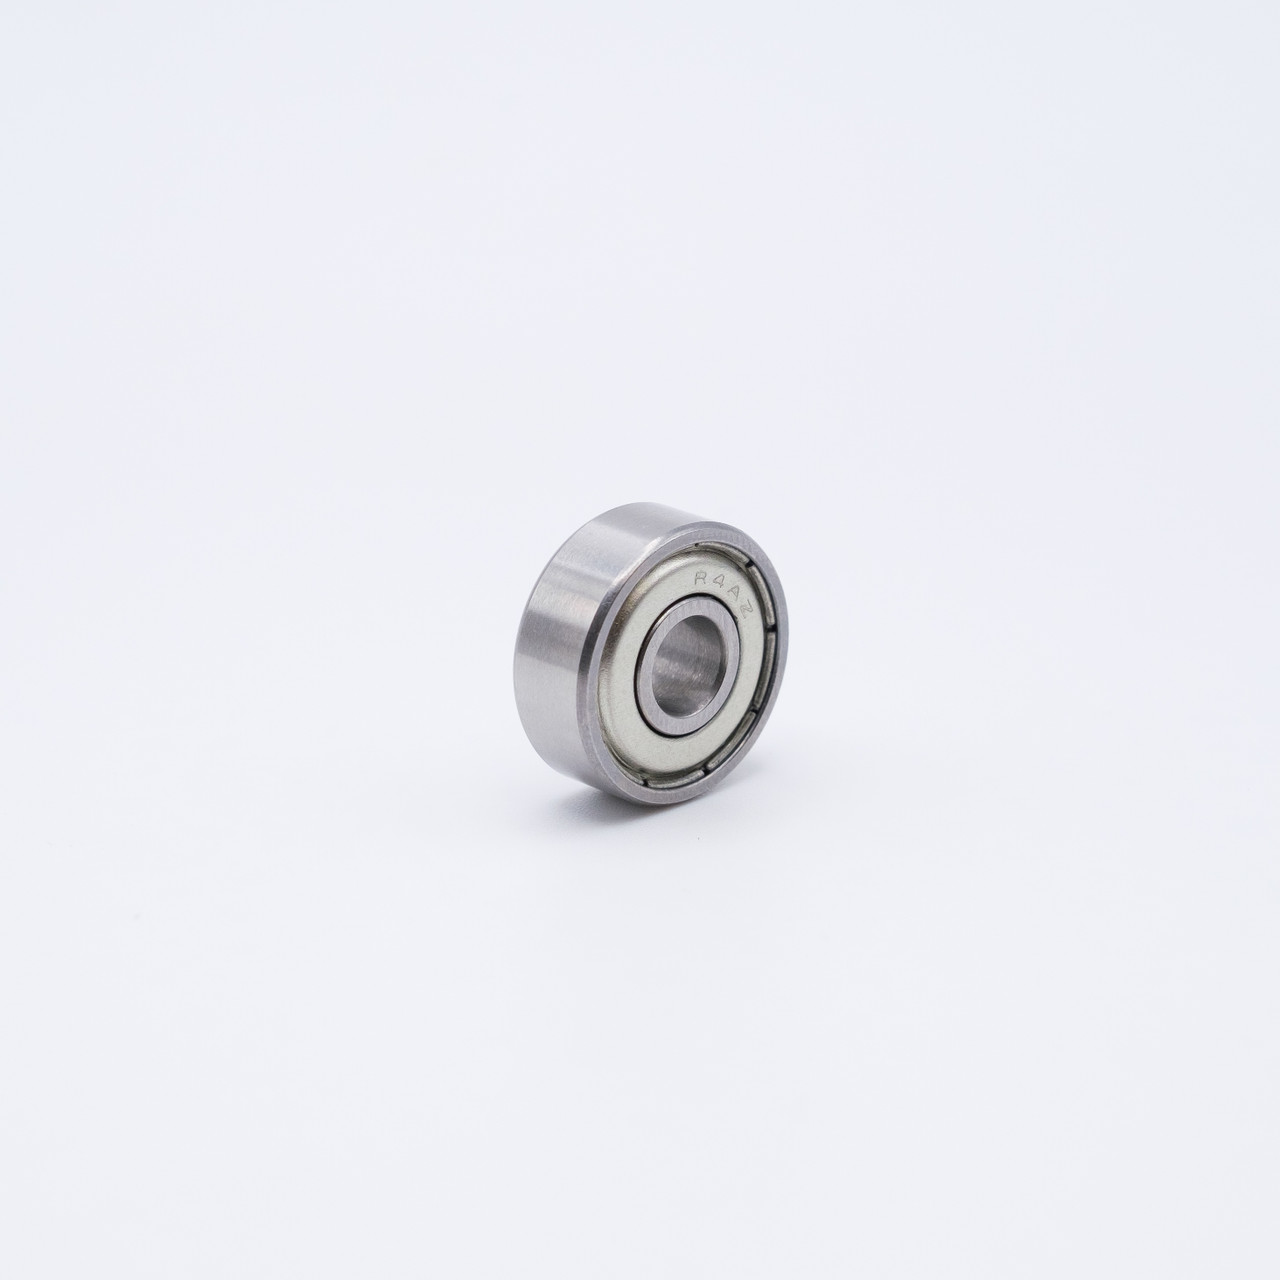 S604-ZZ Stainless Steel Miniature Ball Bearing 4x12x4 Side View